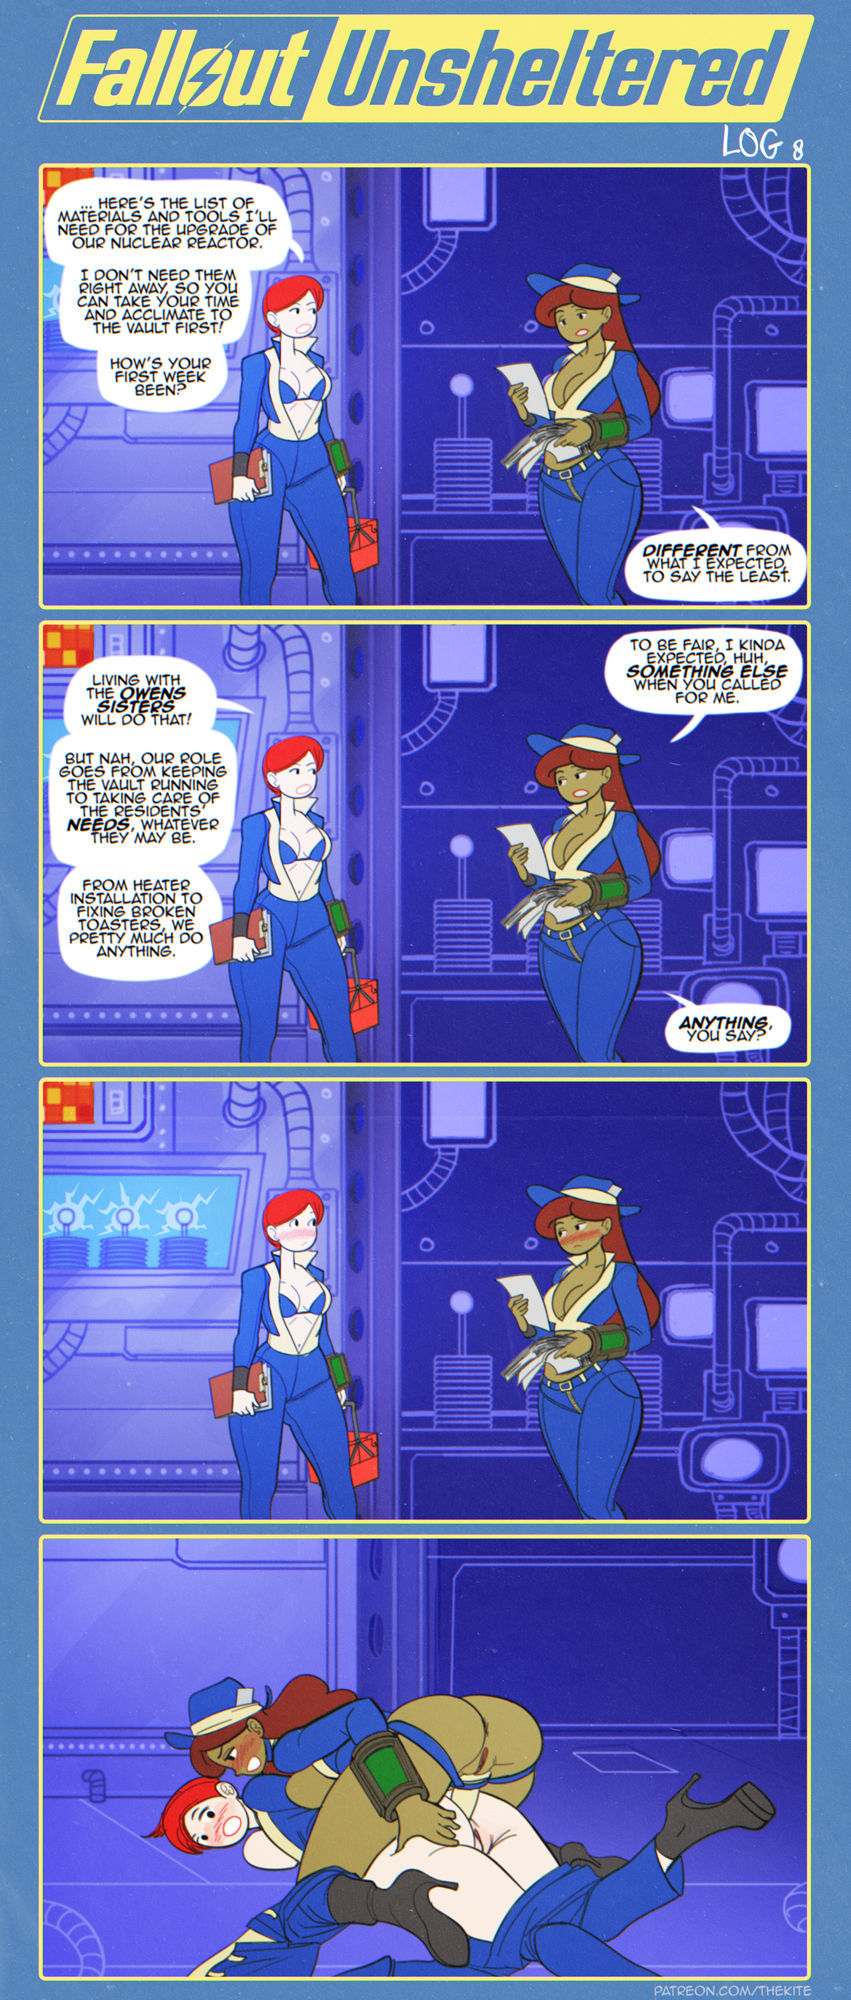 Fallout Unsheltered - The Kite page 8